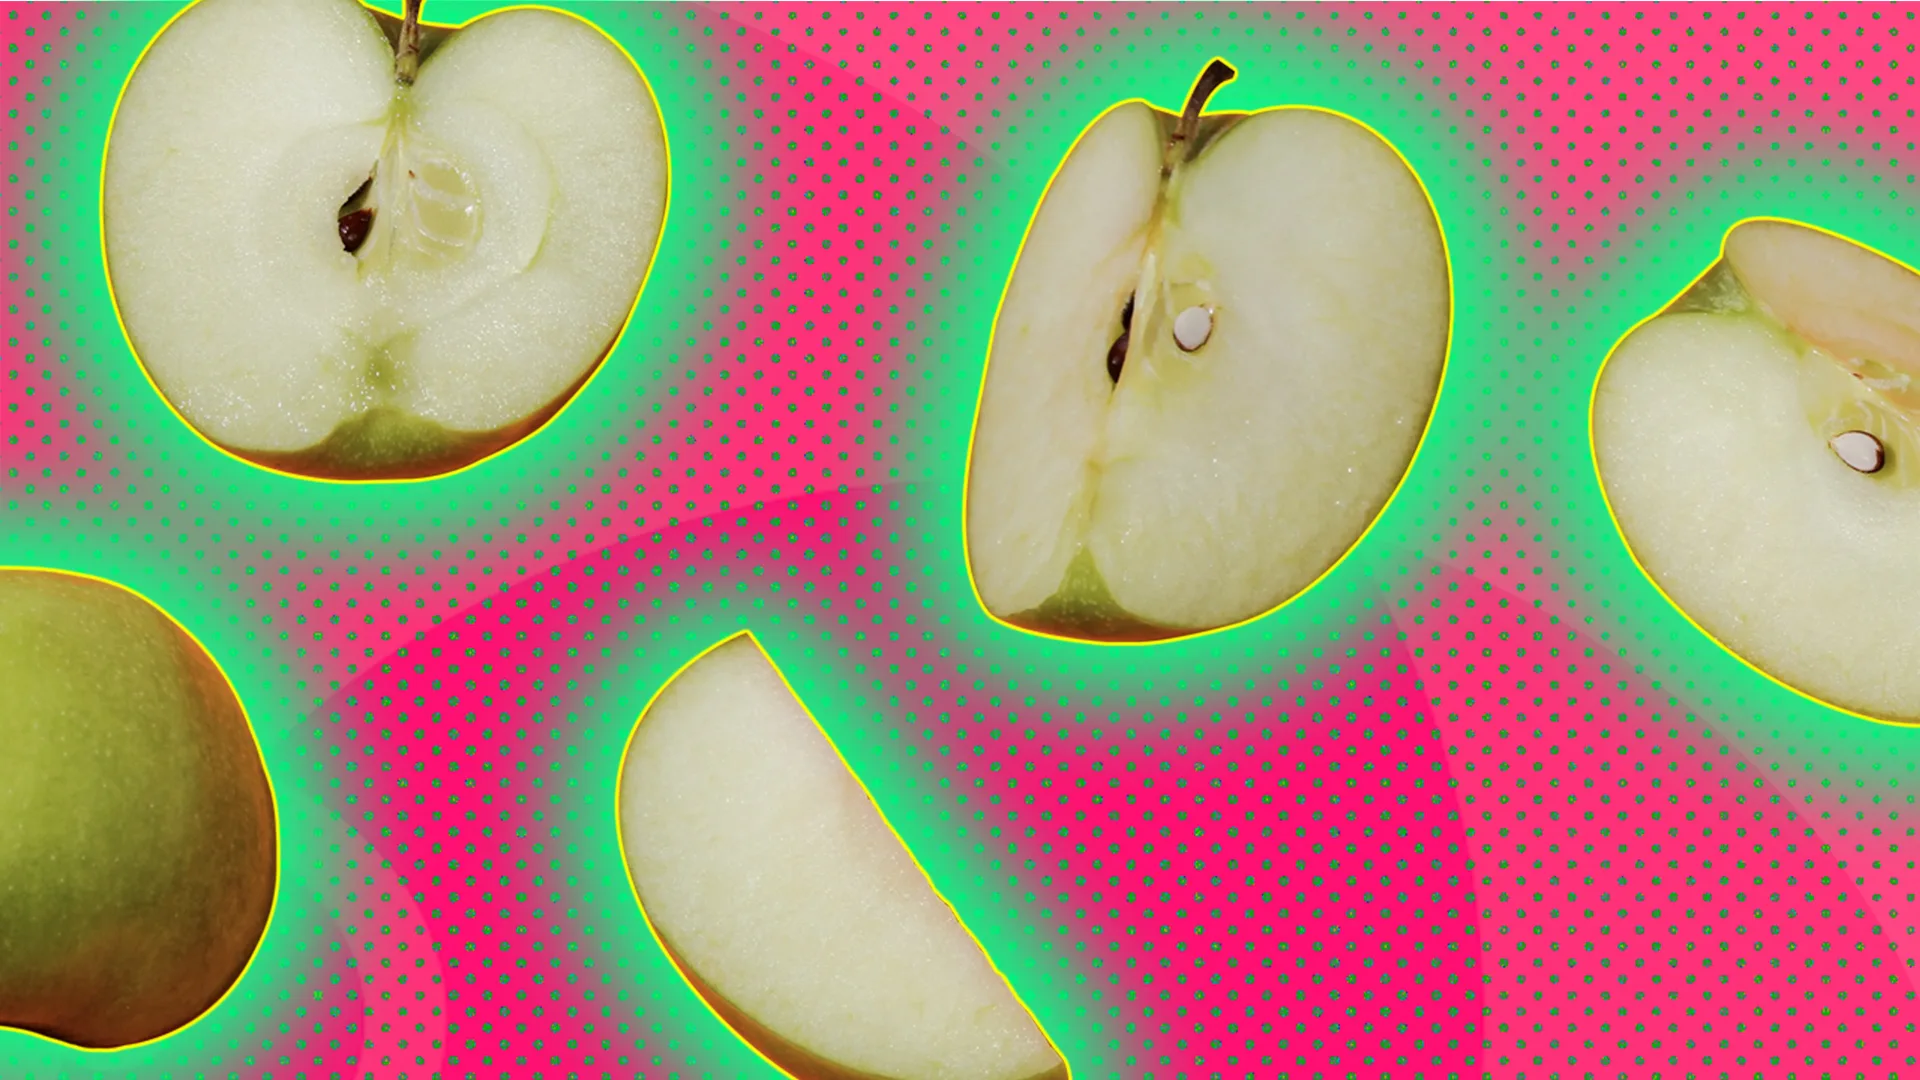 Green Apples with a green glow on a spotty pink background